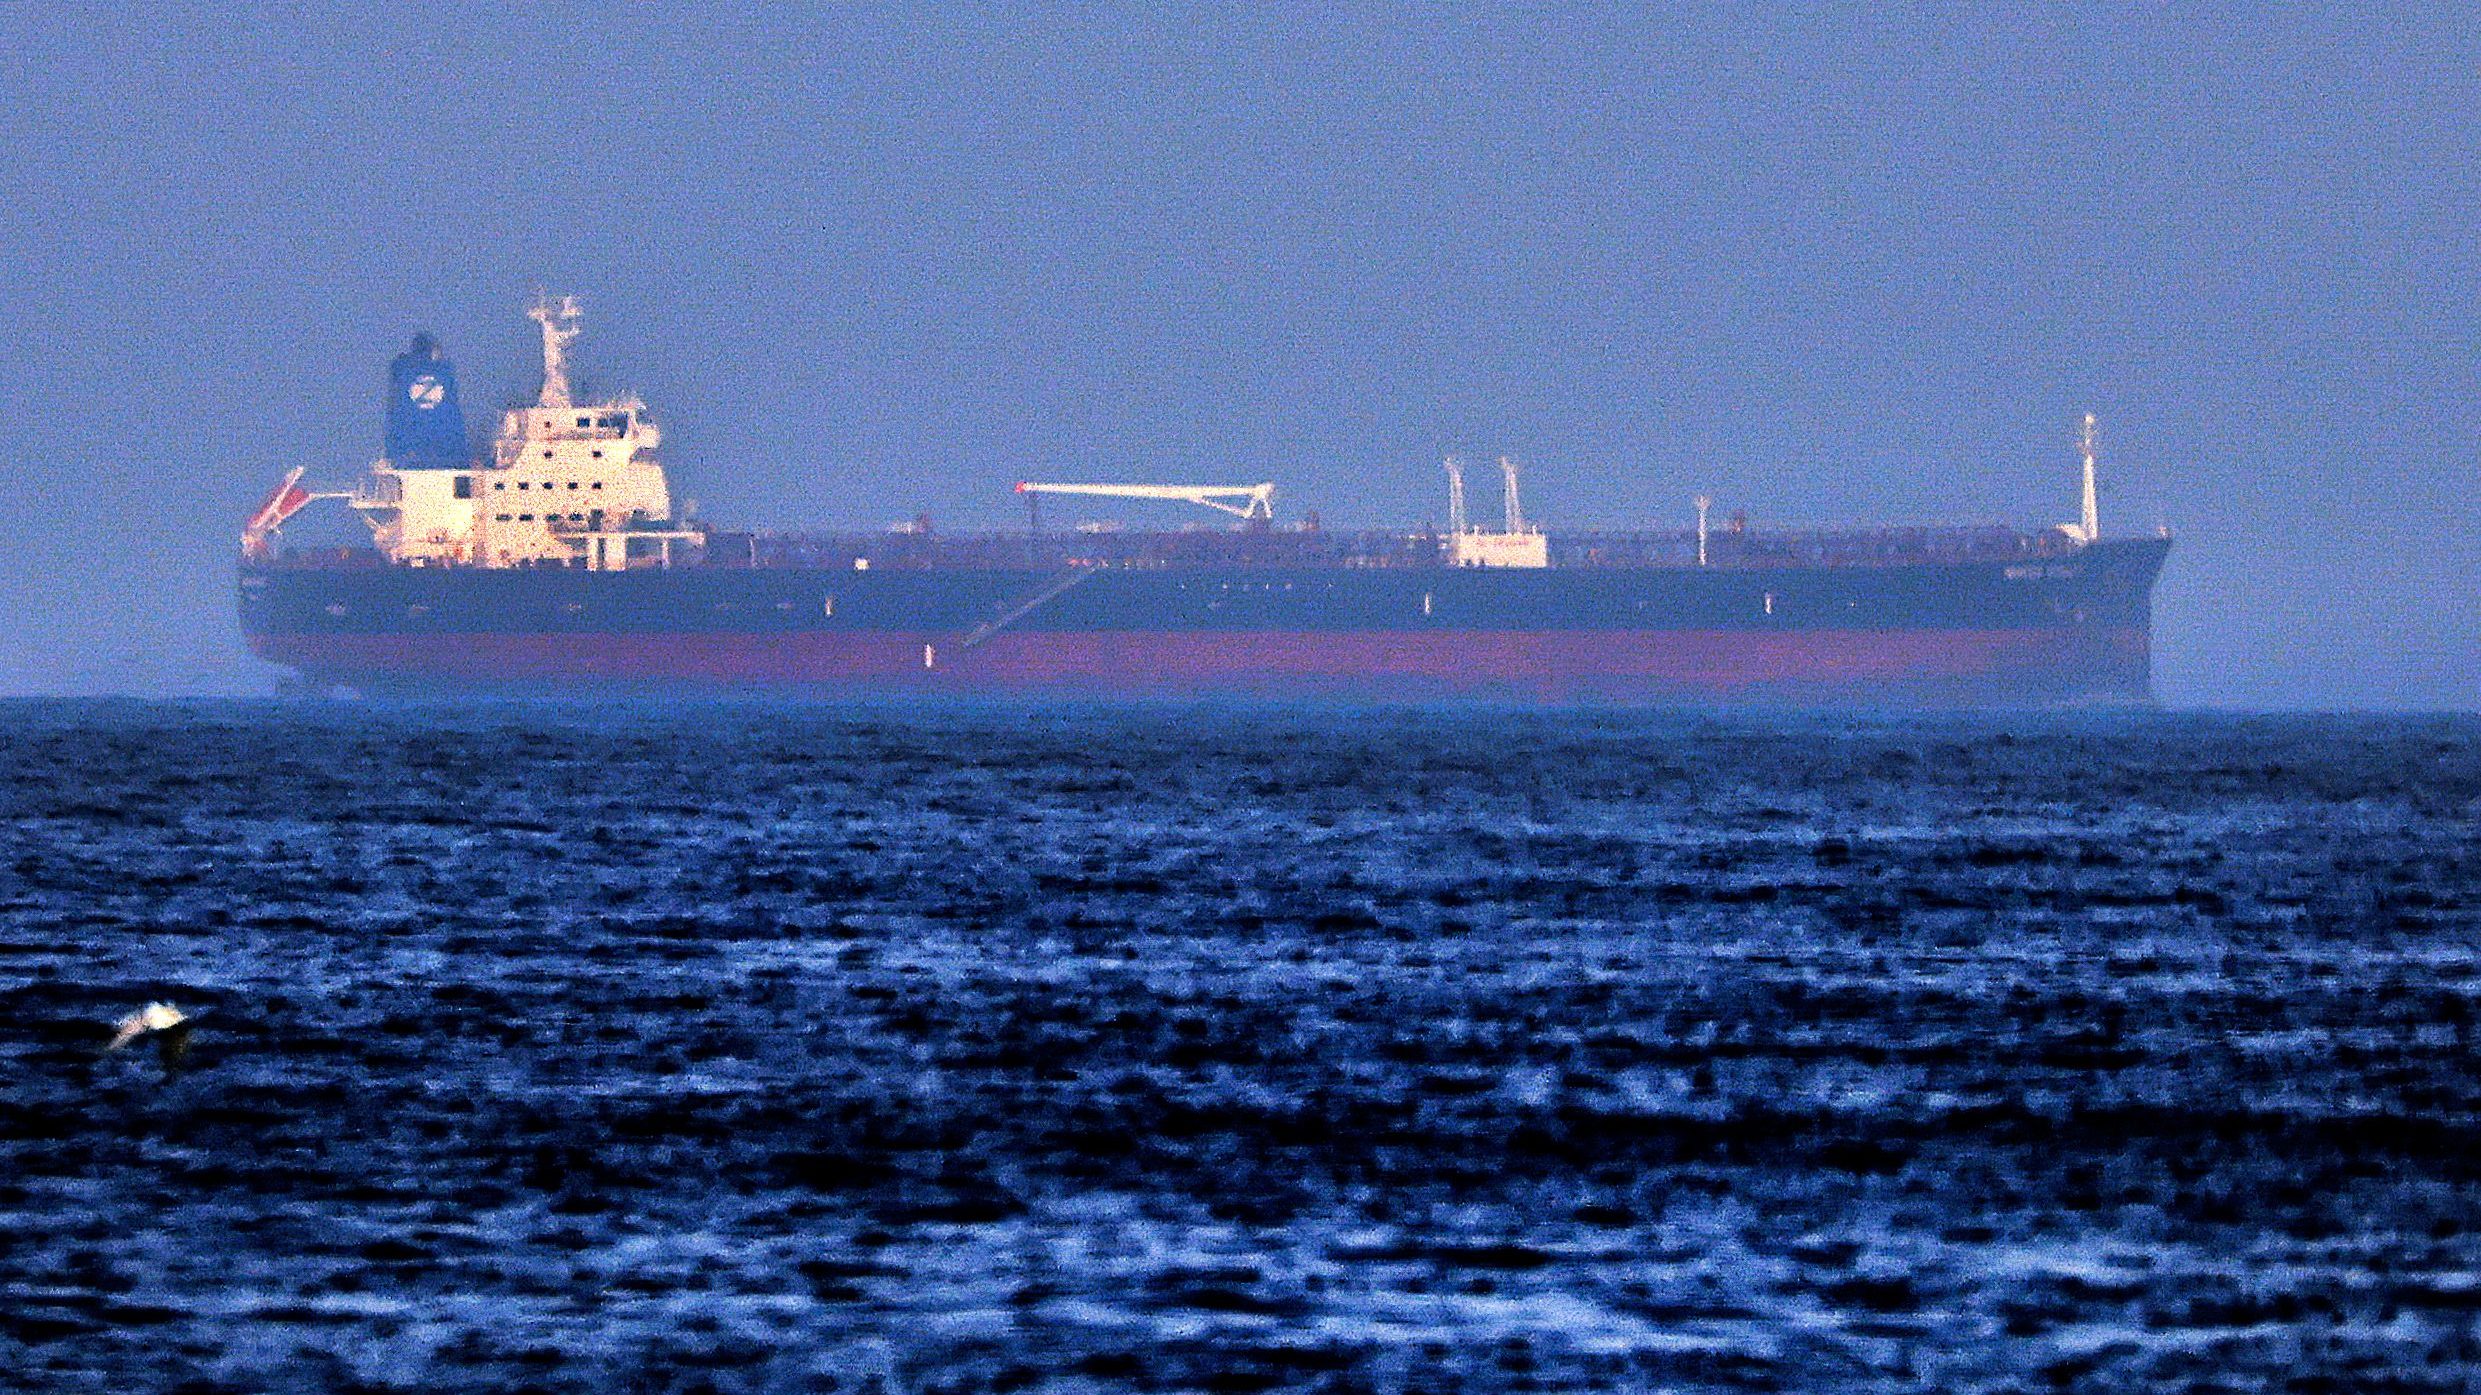 Mystery Surrounds Hijacking, Disabling of Multiple Ships in Gulf of Oman